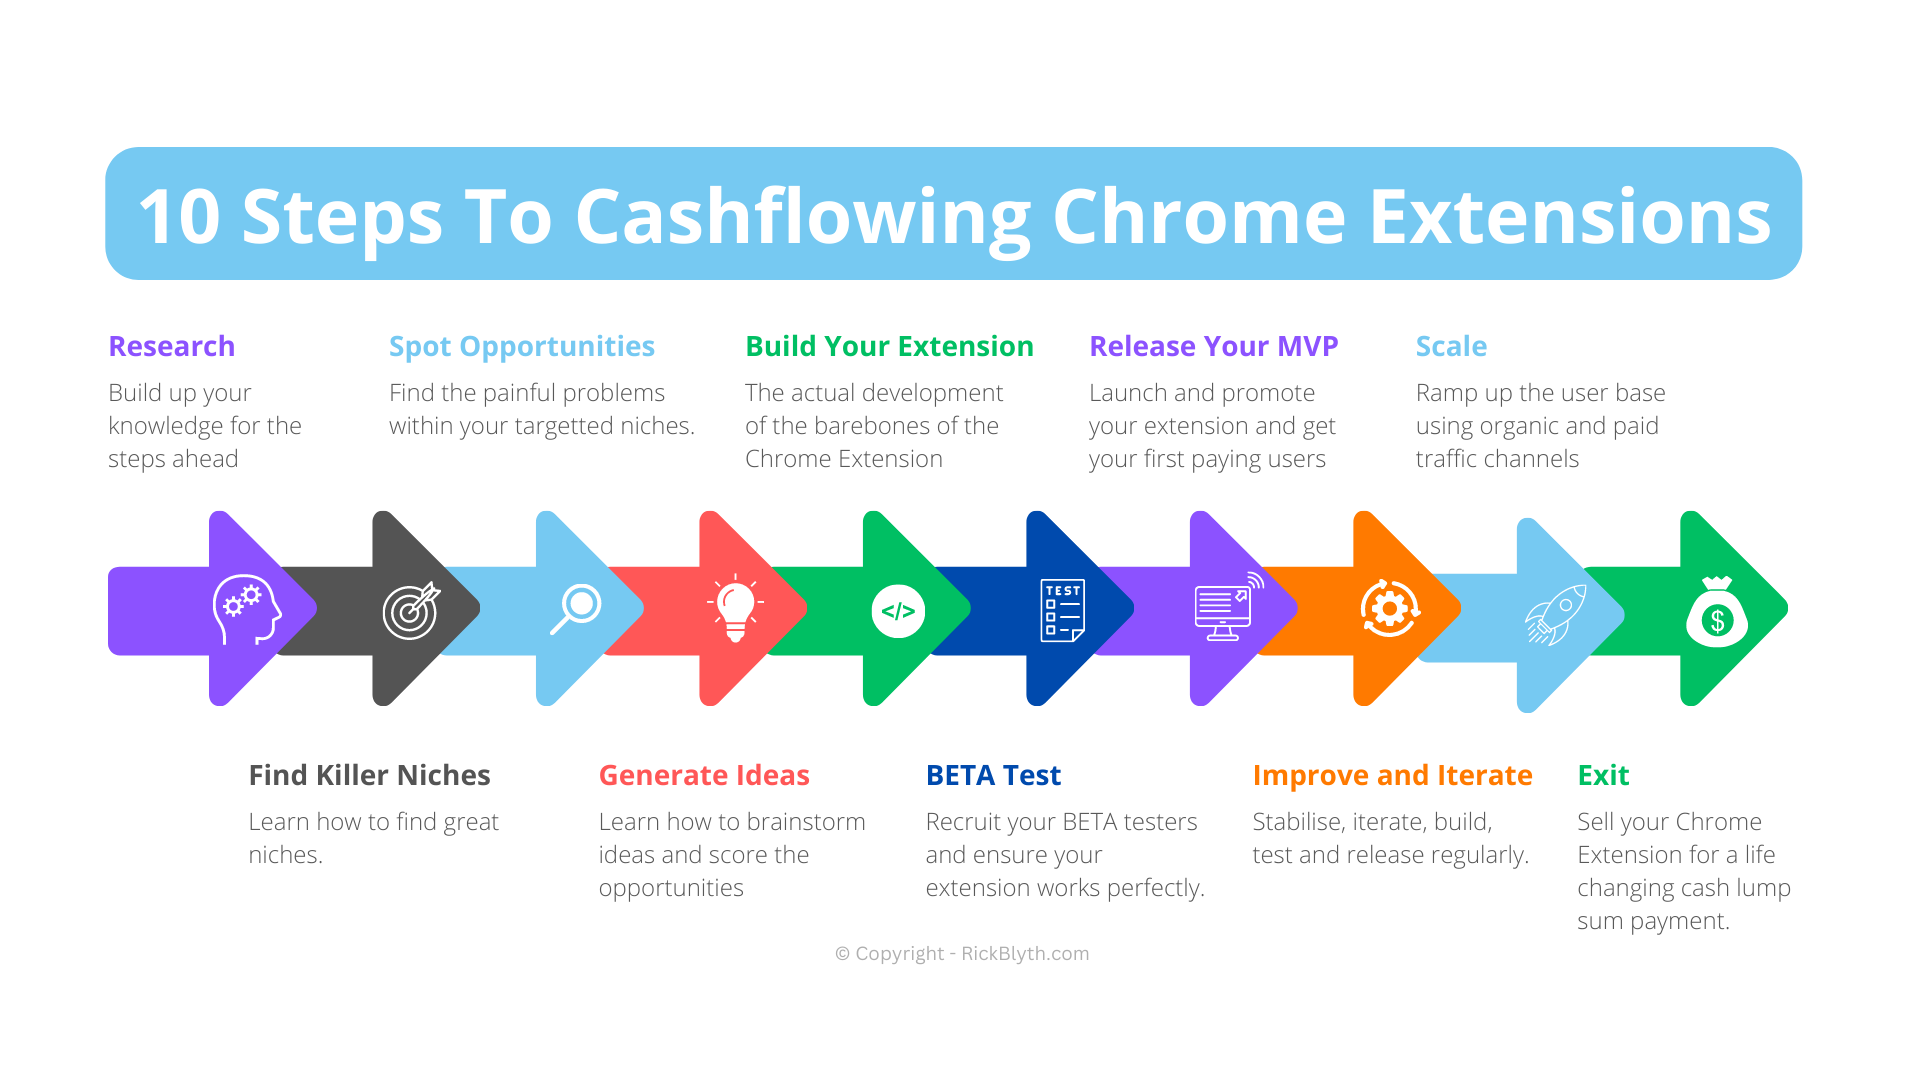 Cashflowing Chrome Extensions By Rick Blyth